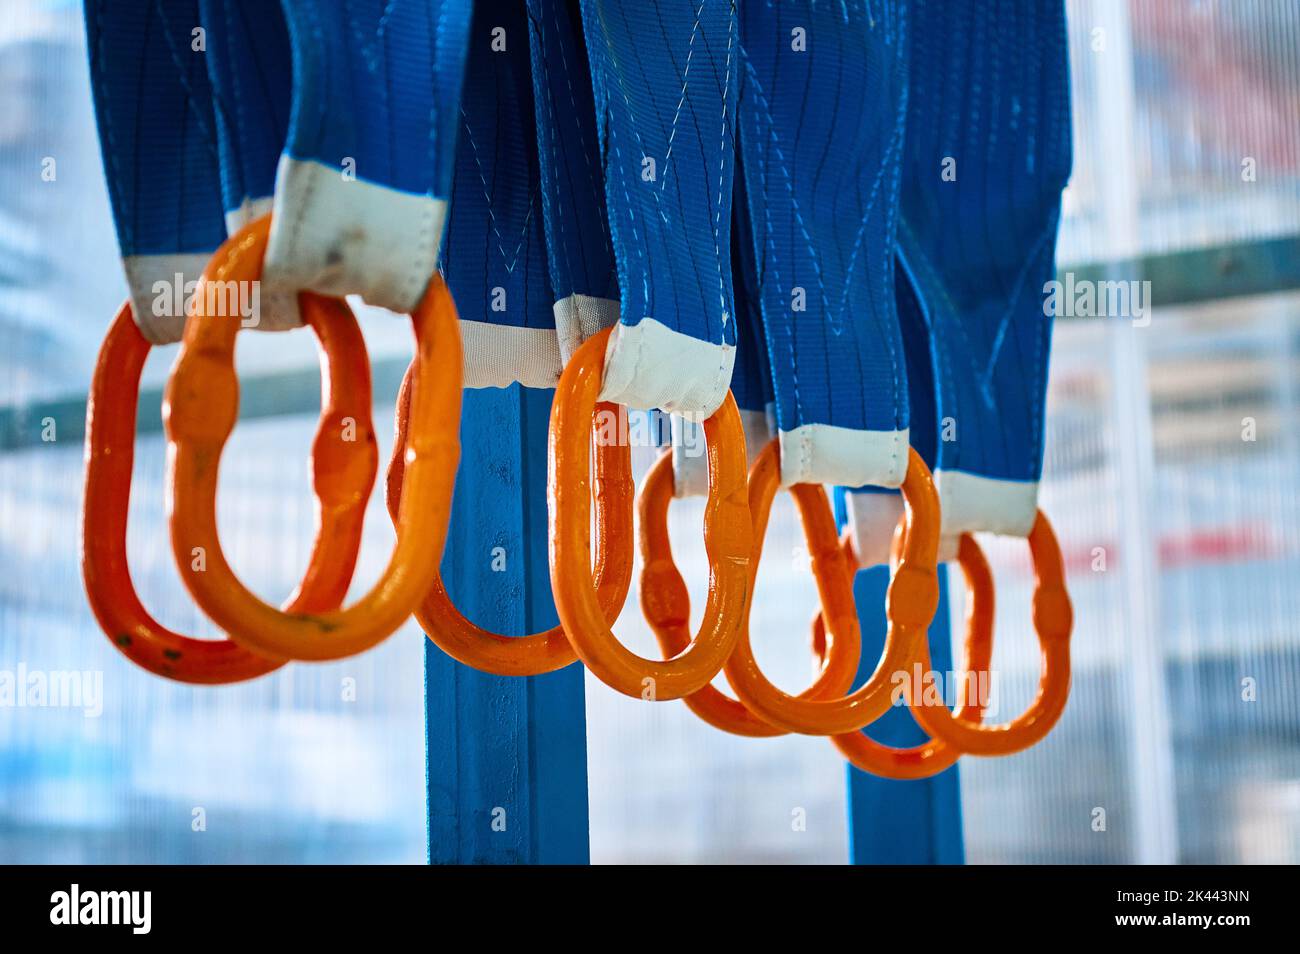 Rigging equipment with textile strops hangs on rack hooks Stock Photo